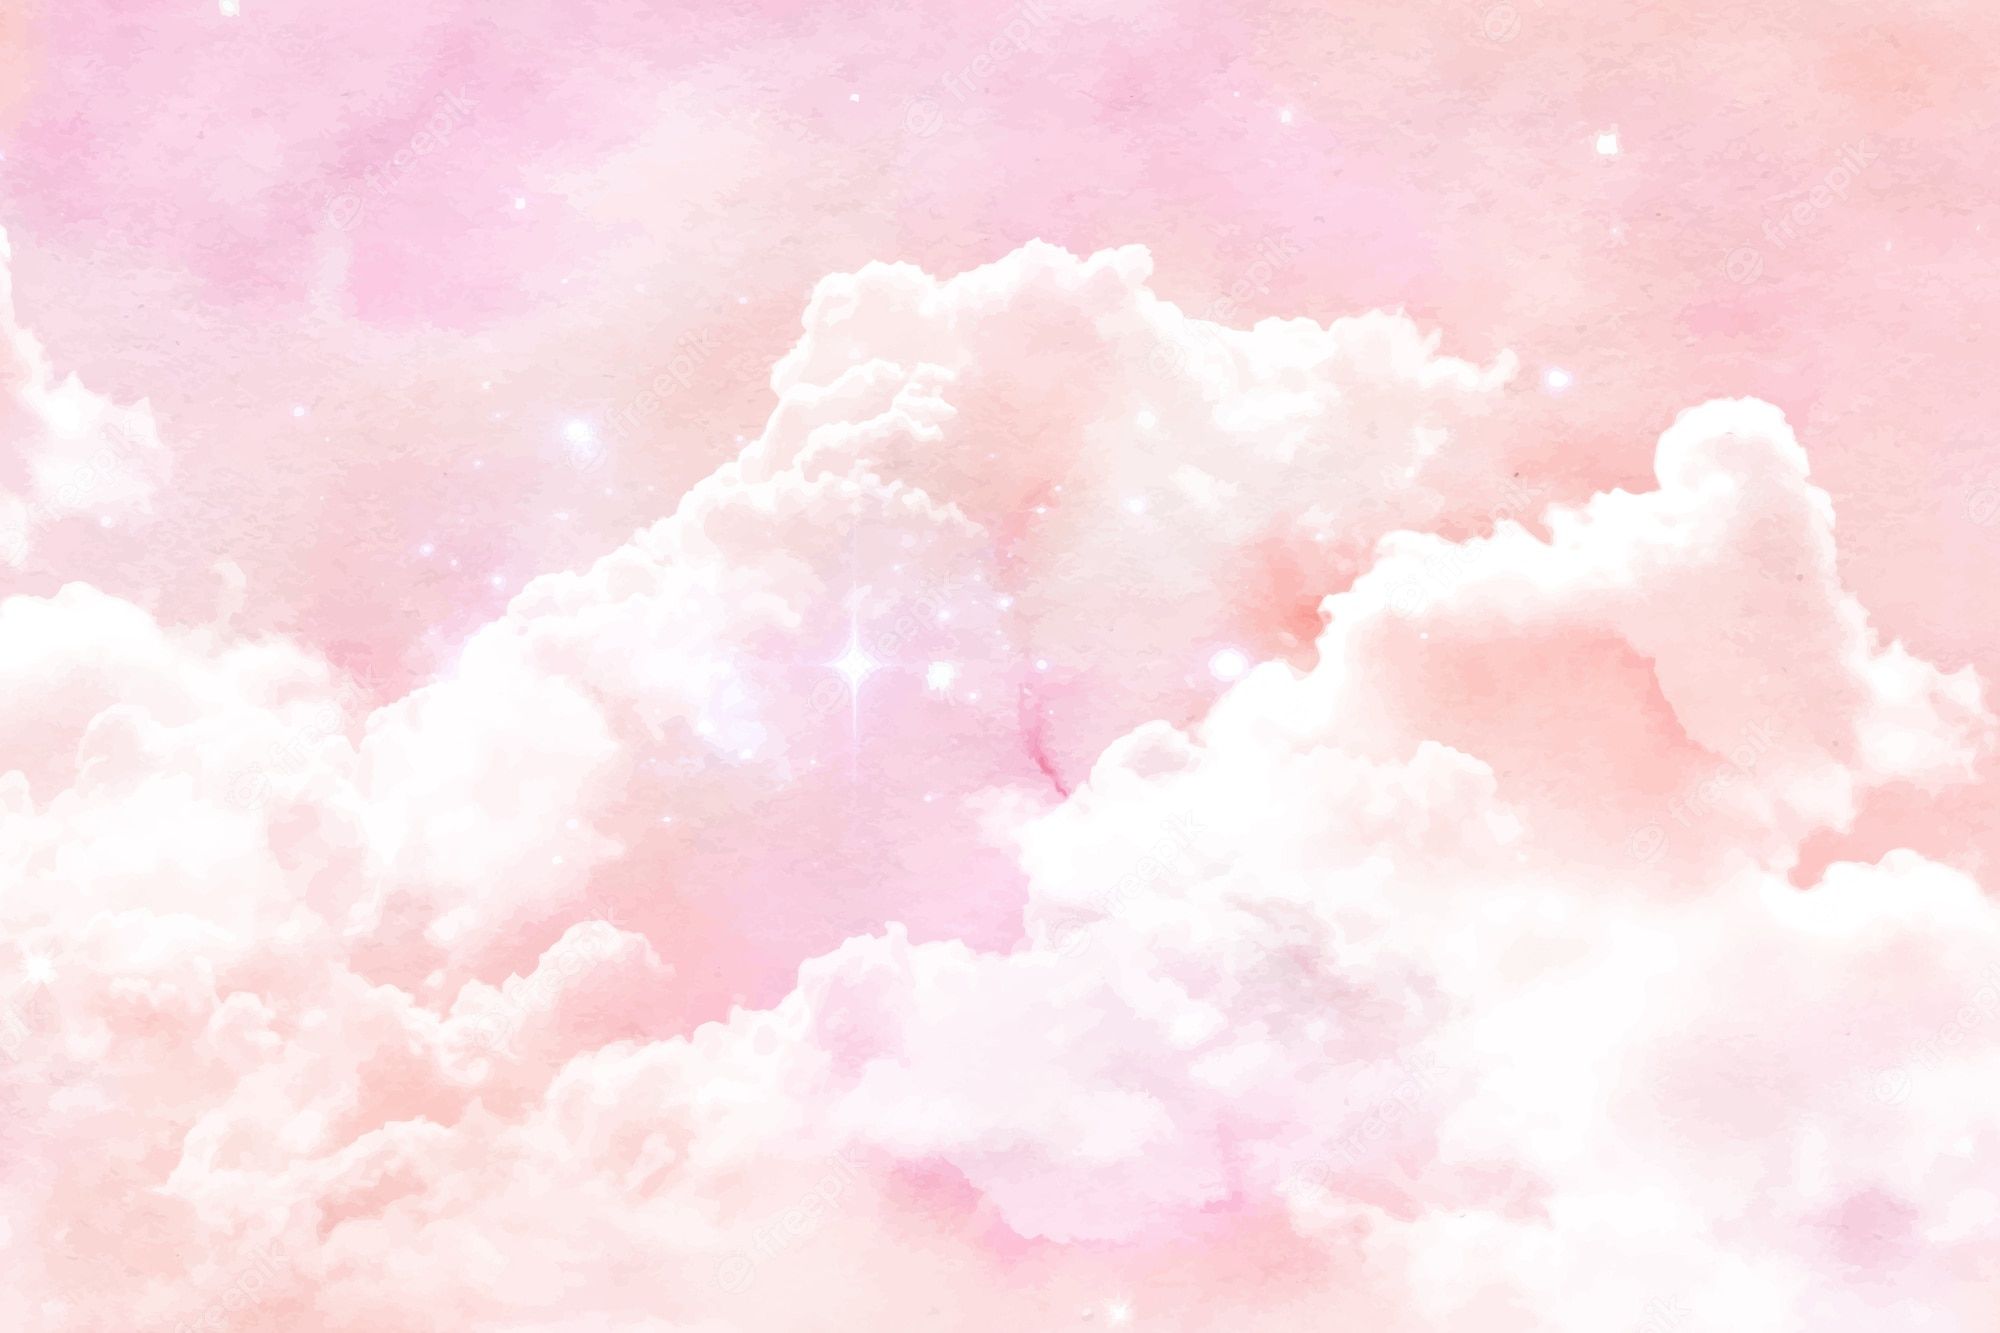 A pink and white watercolor sky with clouds and stars. - Pink, watercolor, cloud